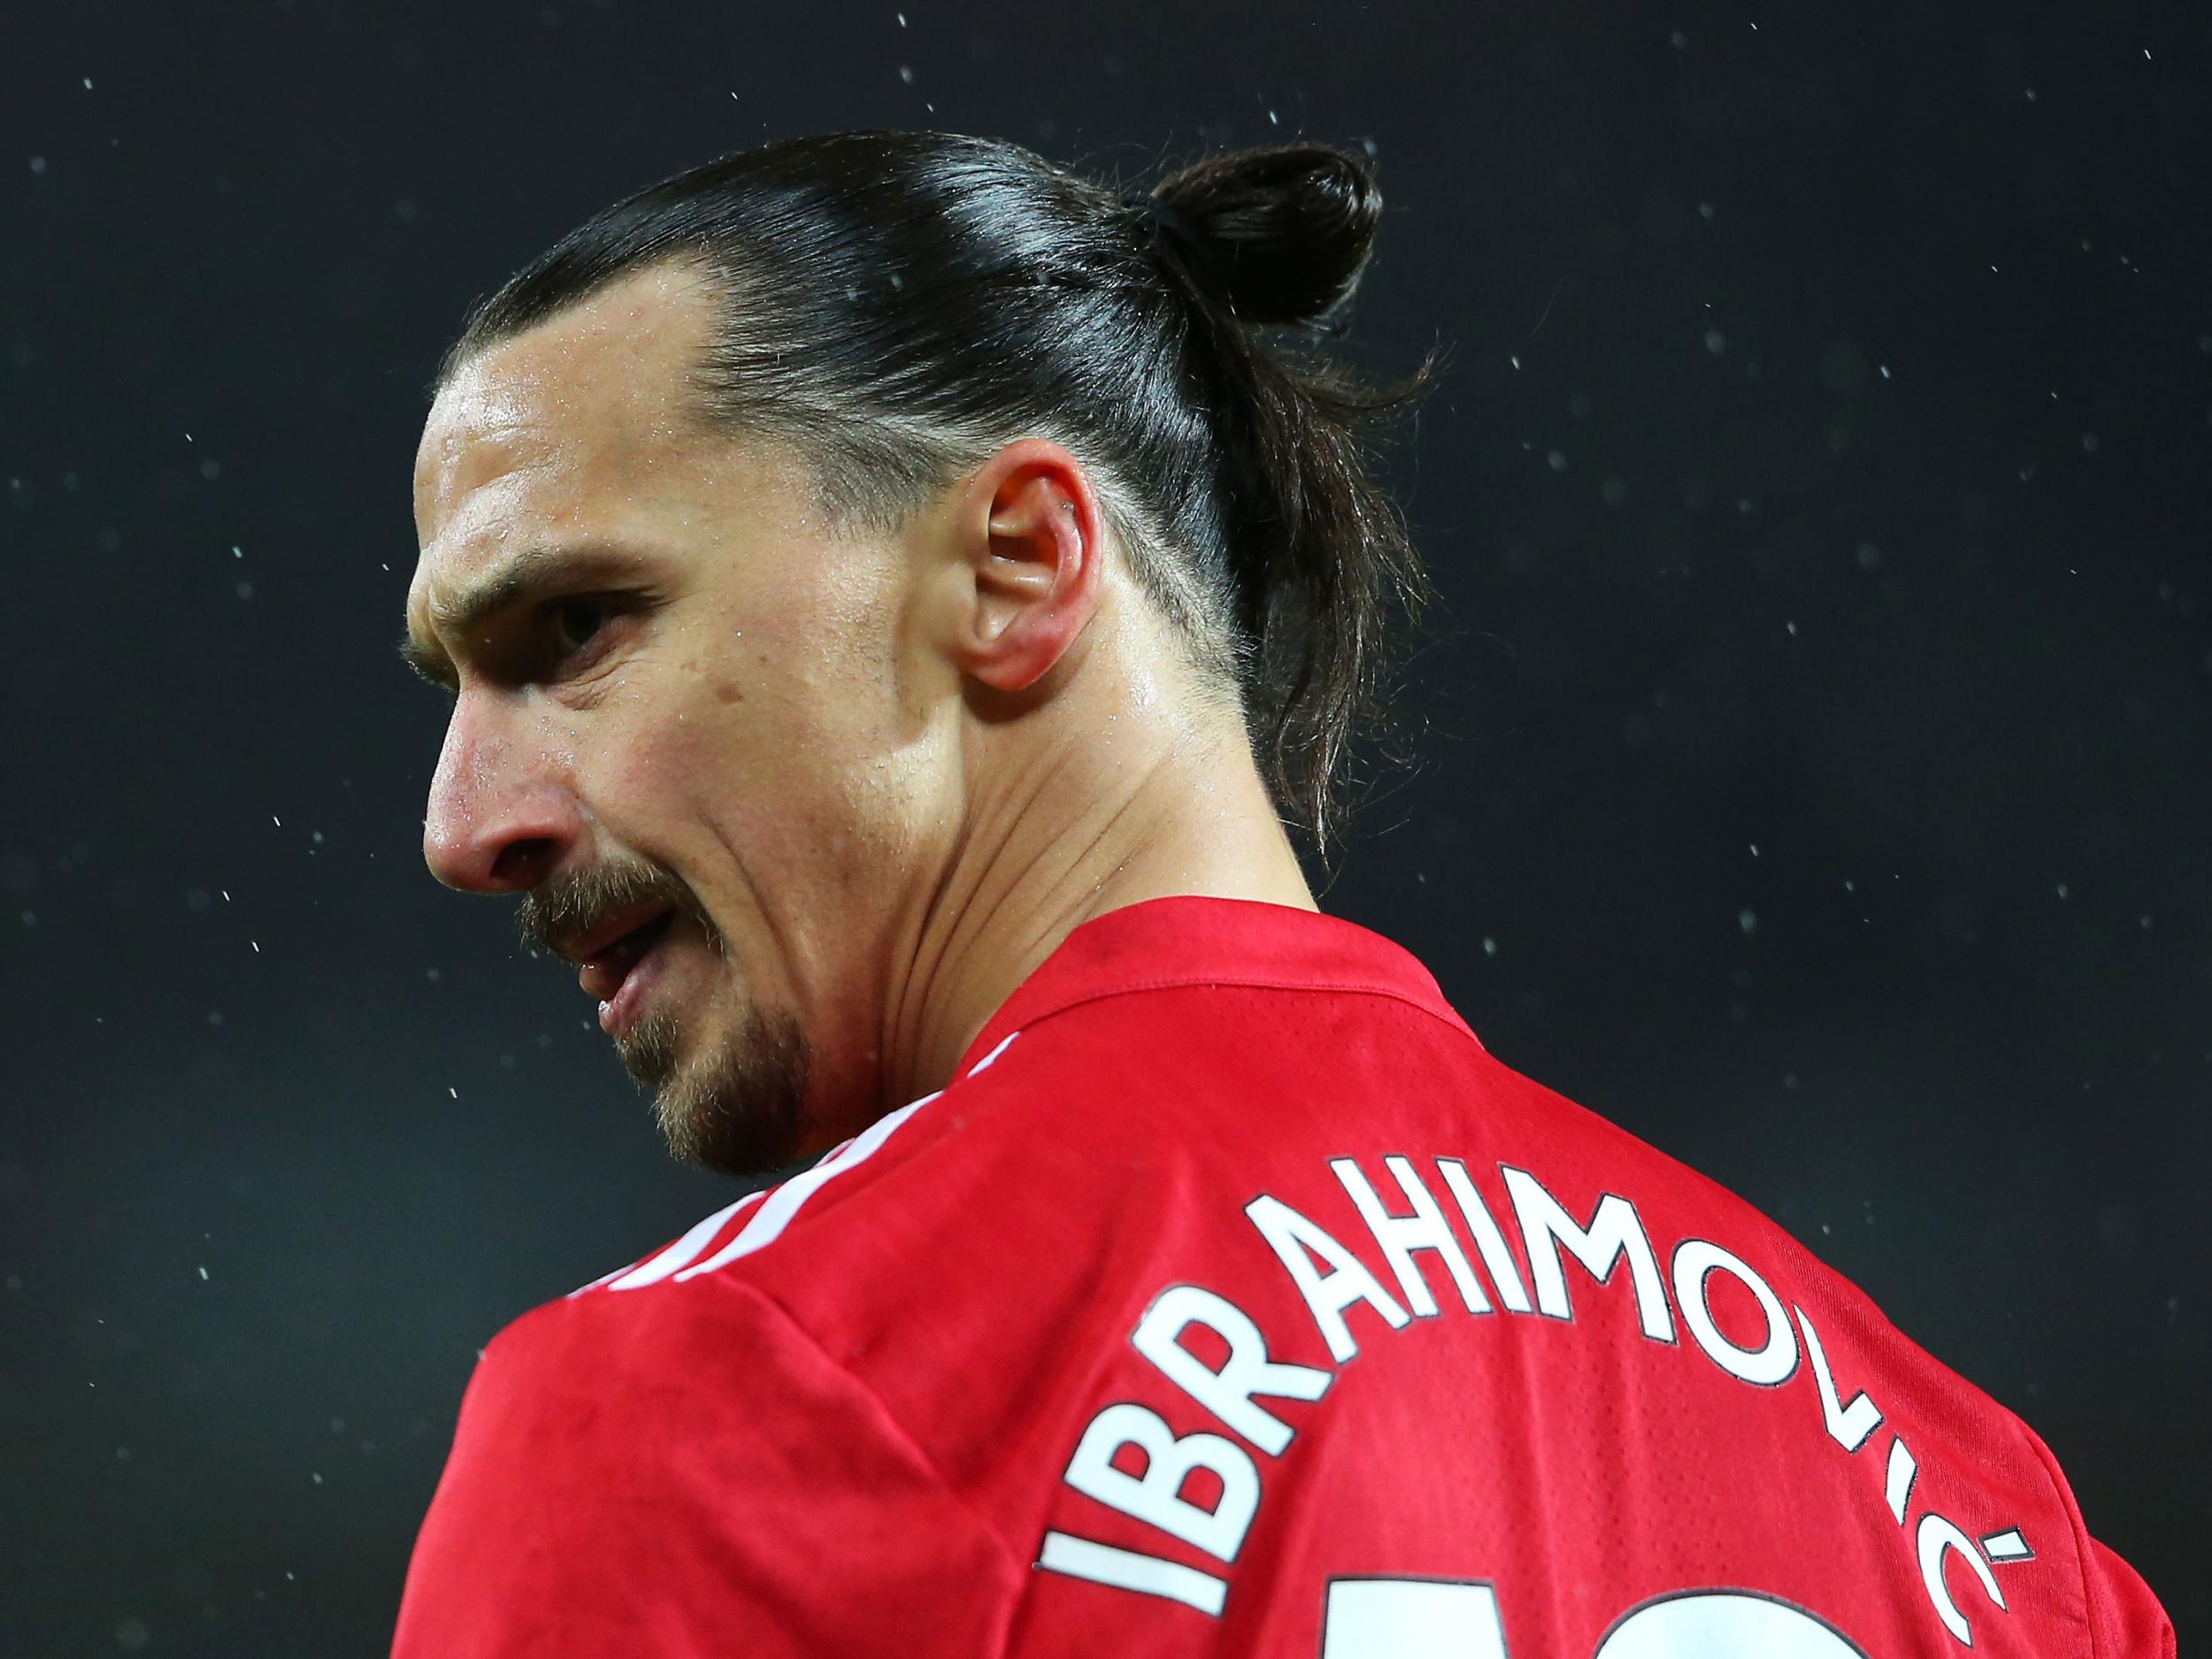 Zlatan Ibrahimovic struggled to fully recover from the effects of a serious knee injury at United